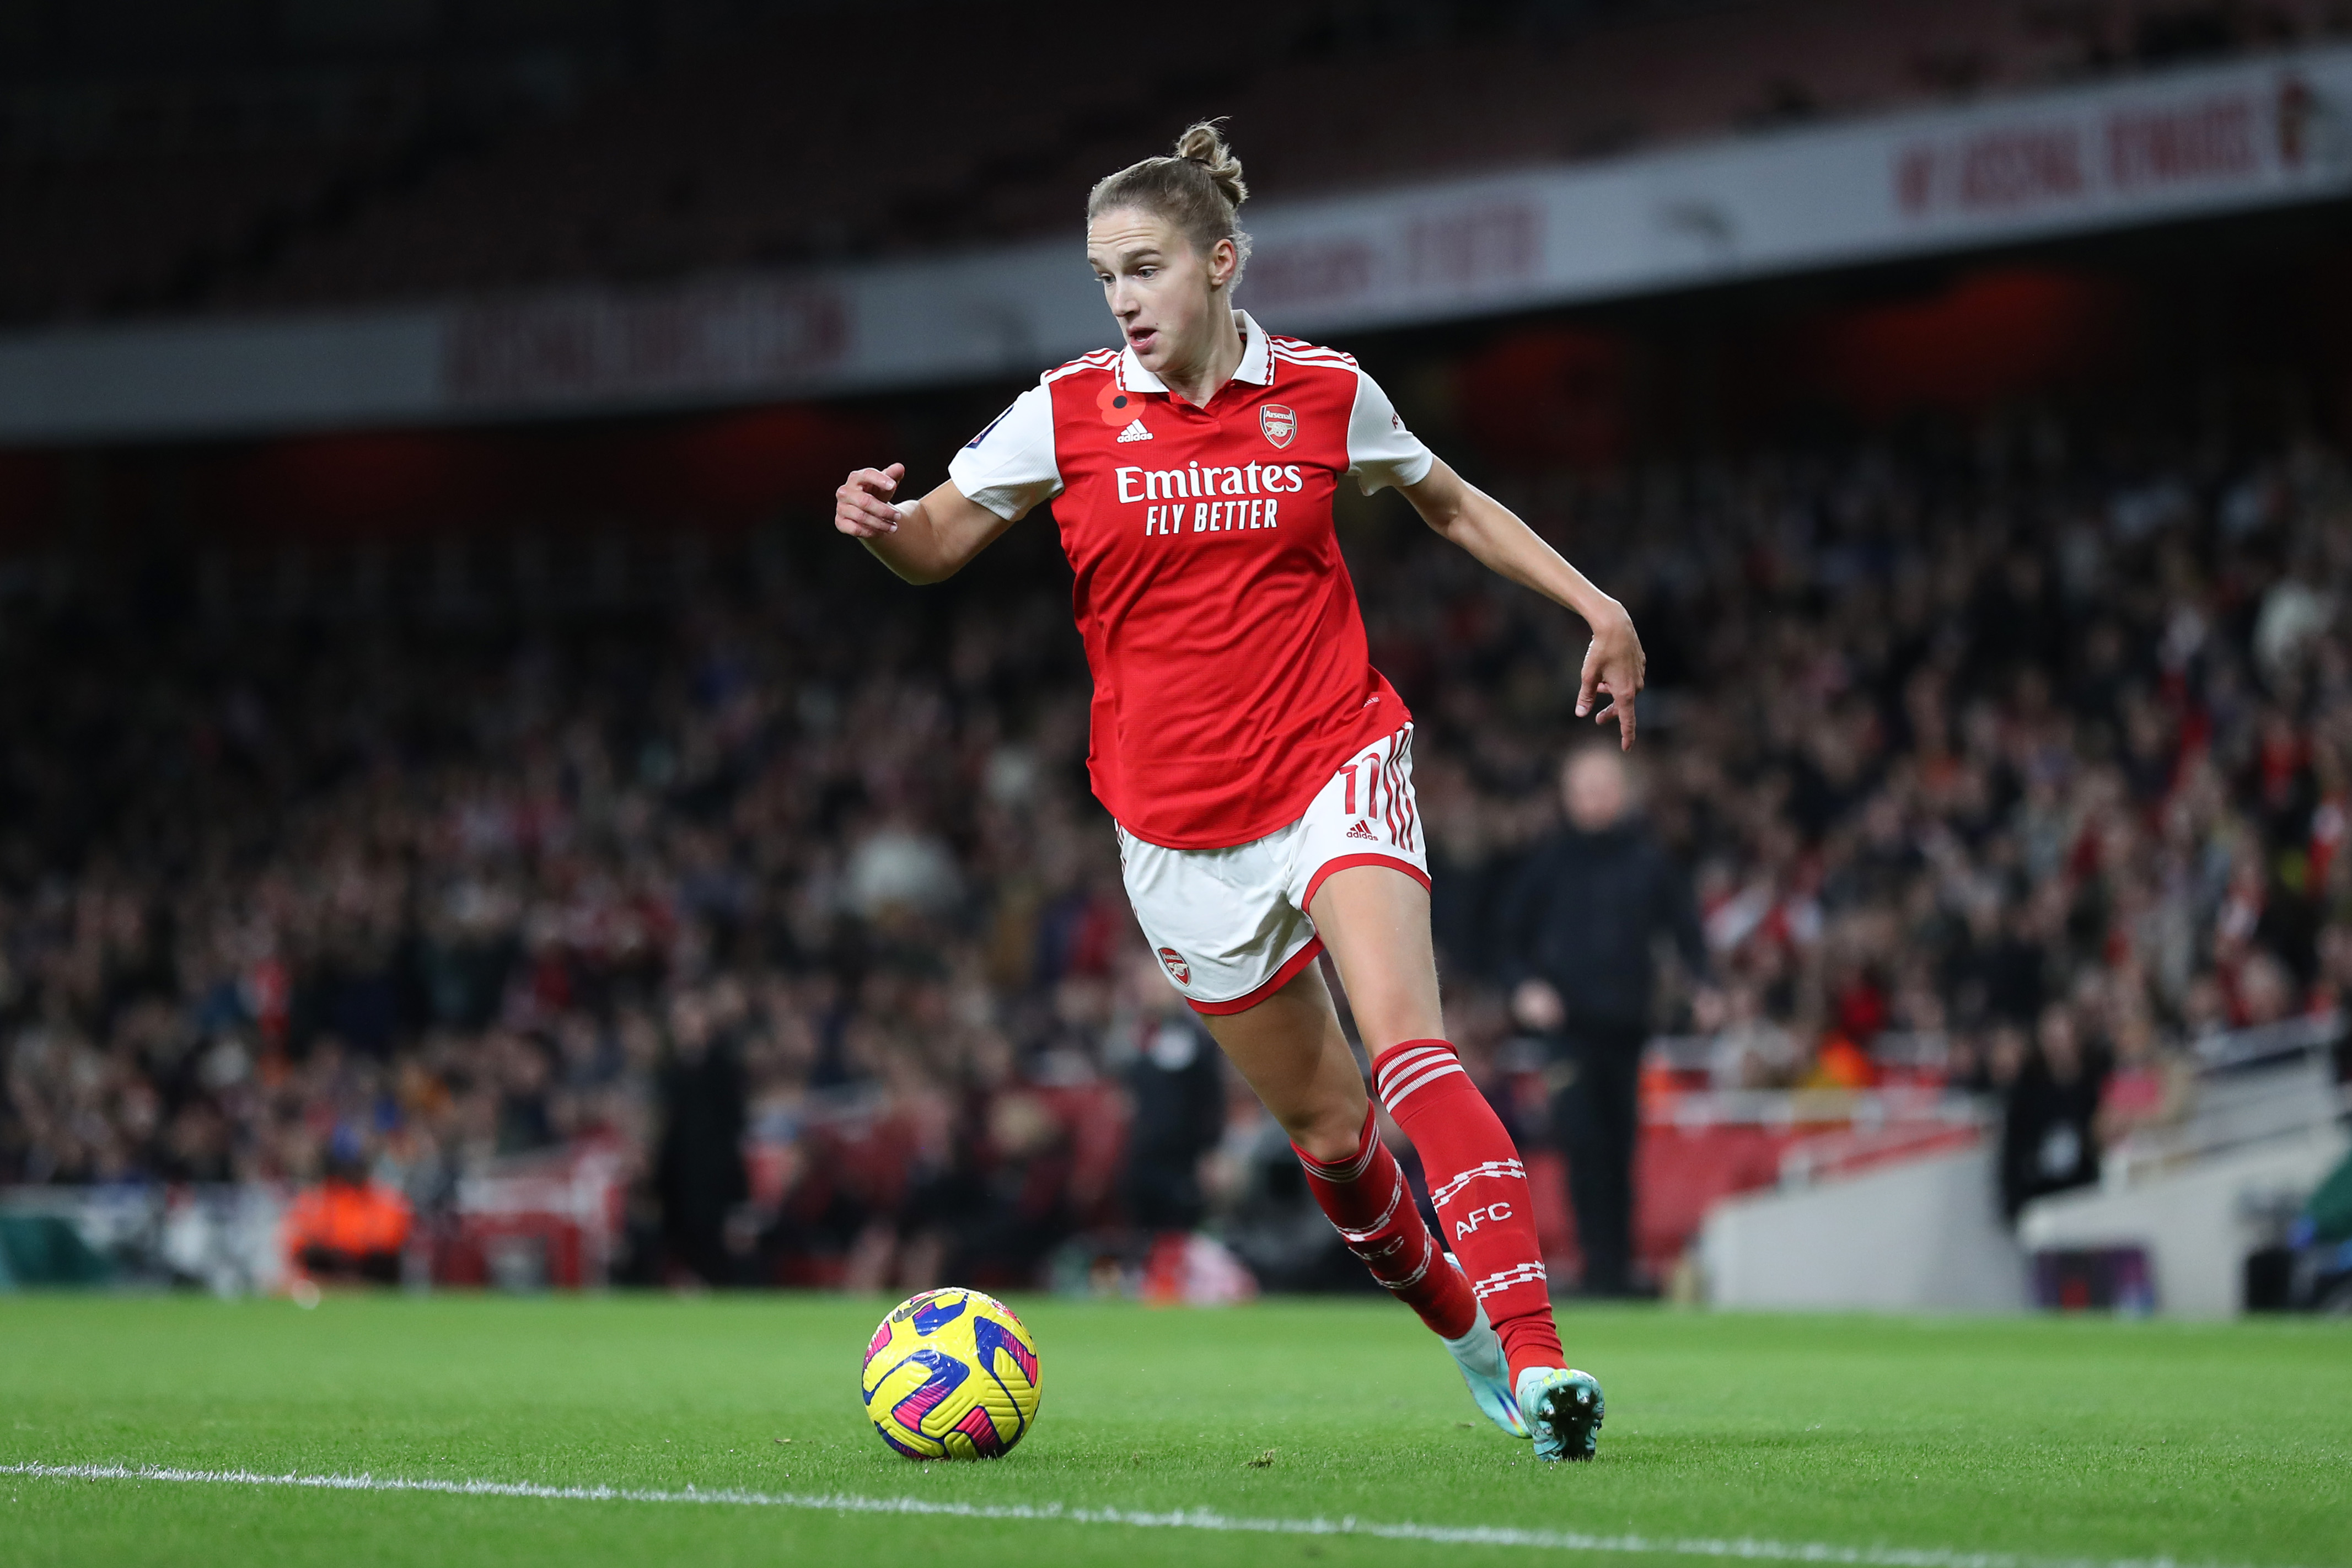 Arsenal Women held in Turin as Miedema makes her mark 